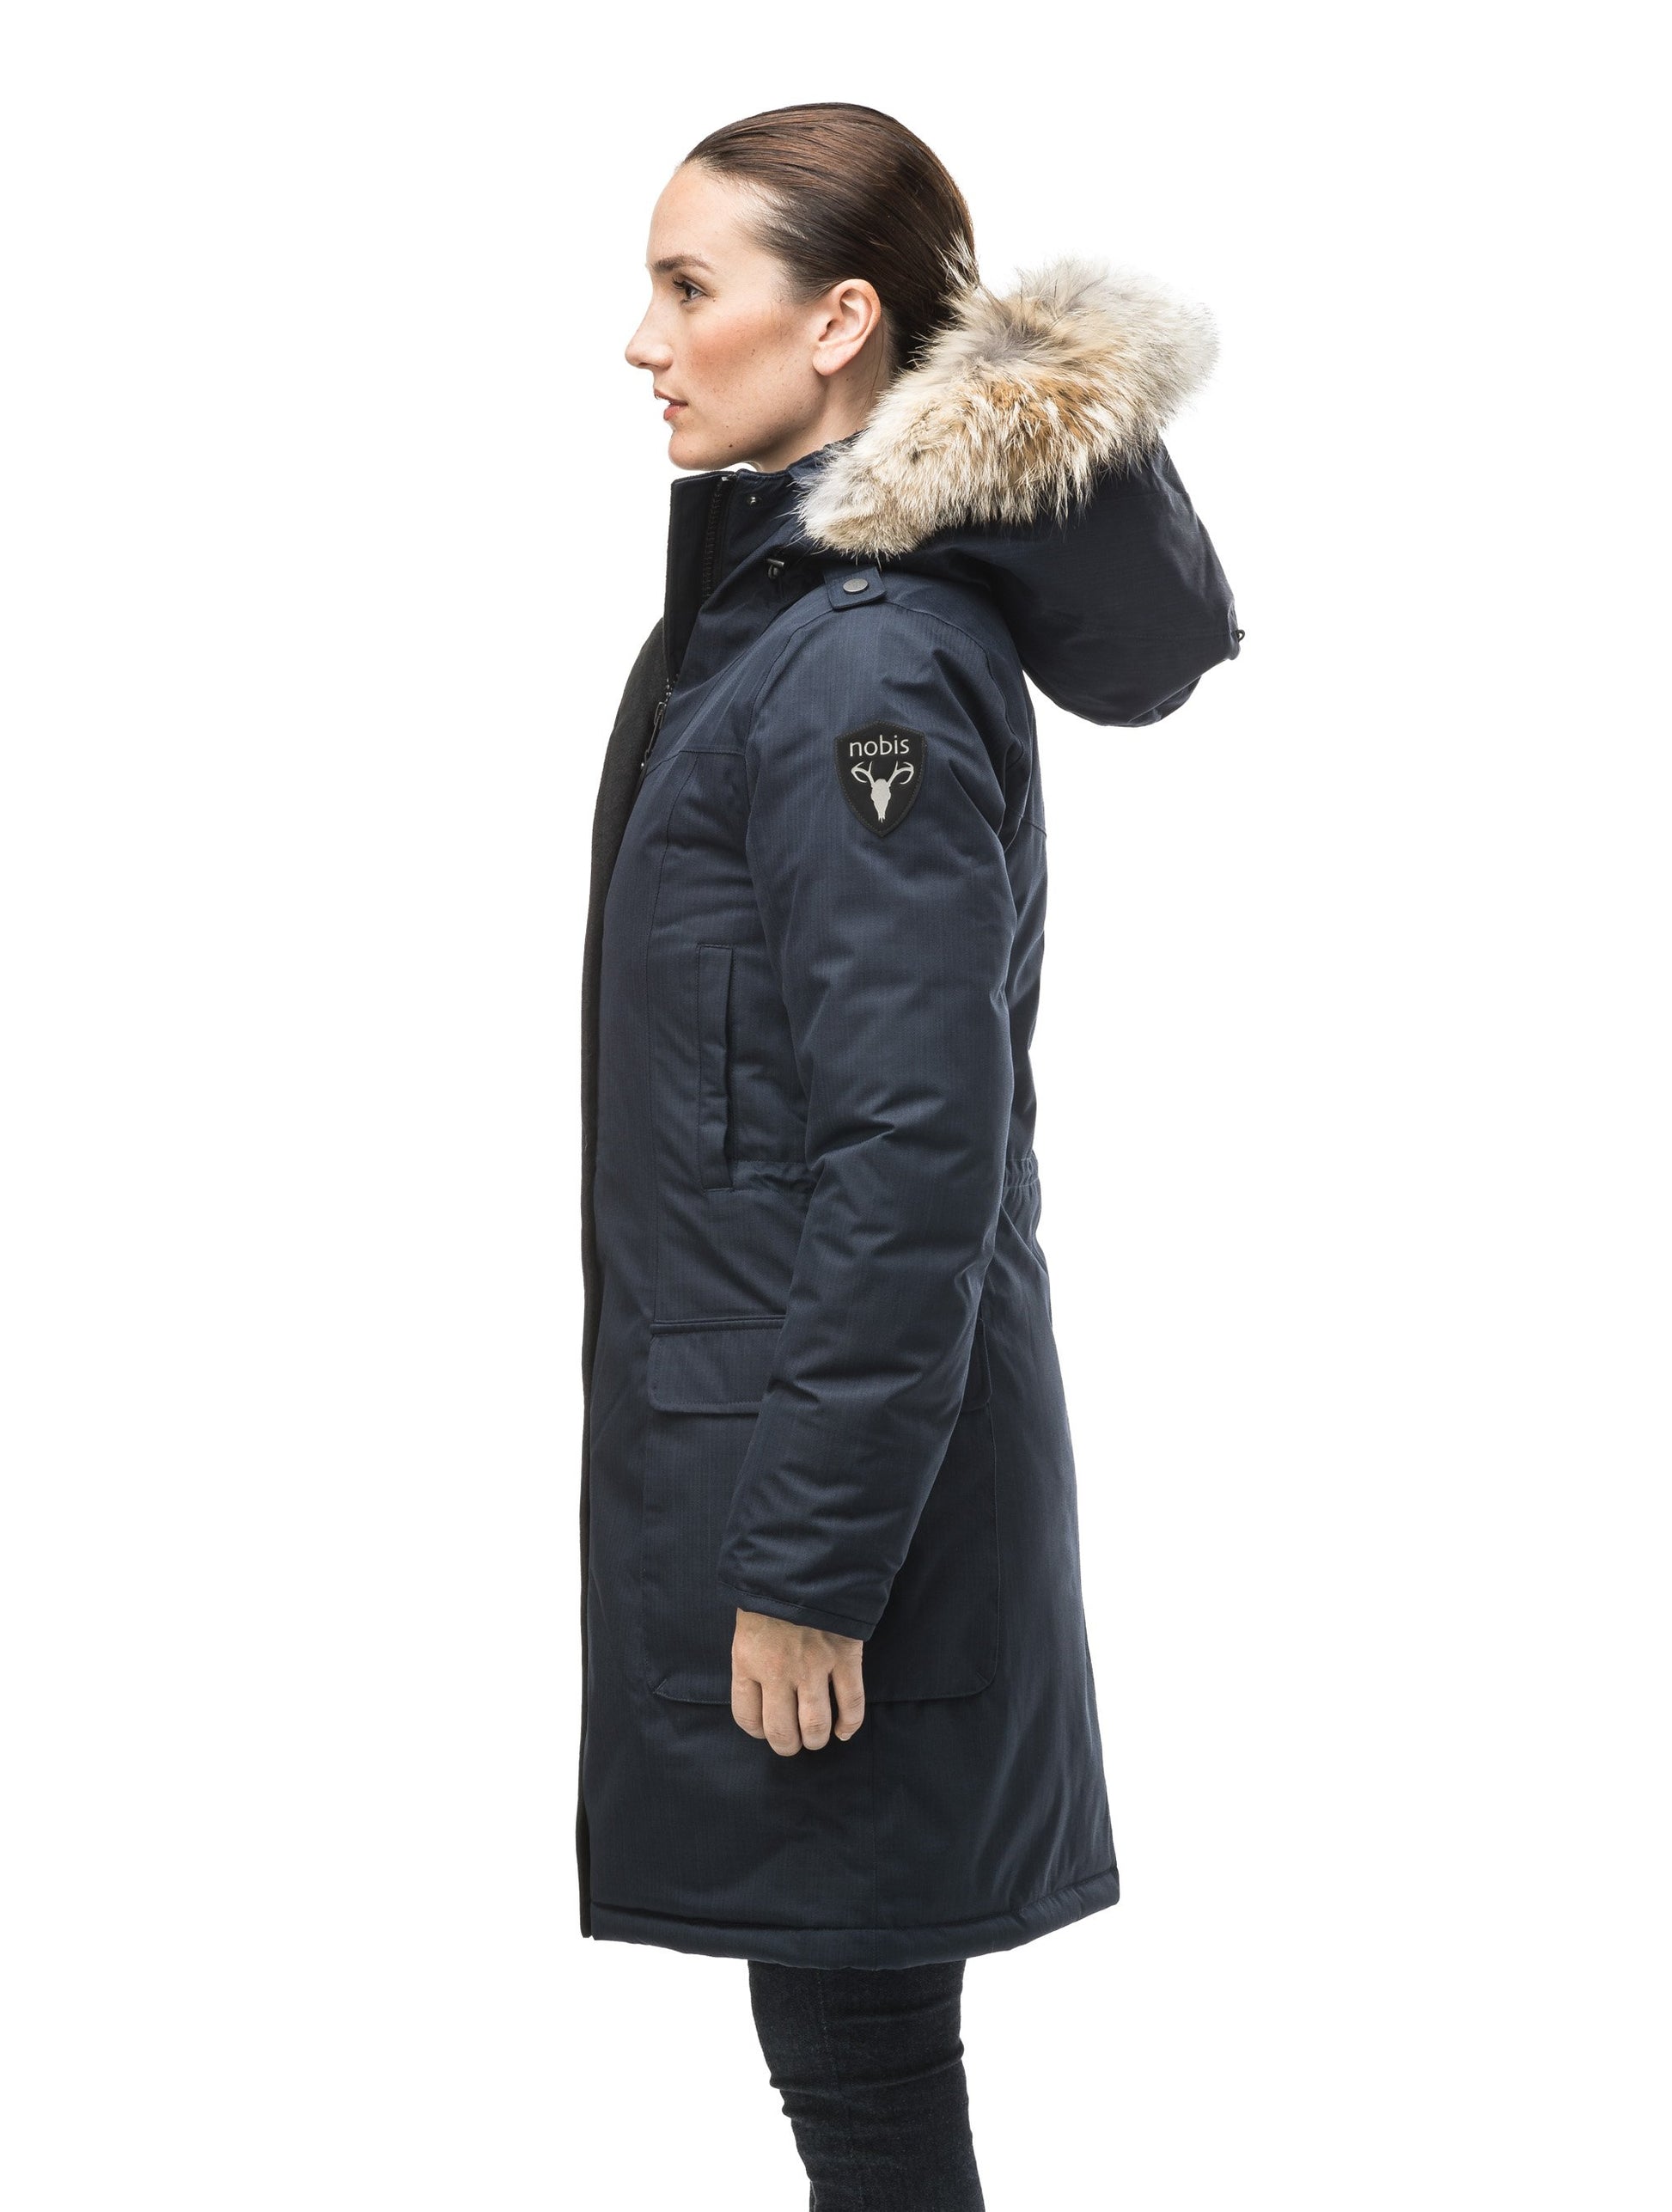 Women's knee length down filled parka with fur trim hood in CH Navy